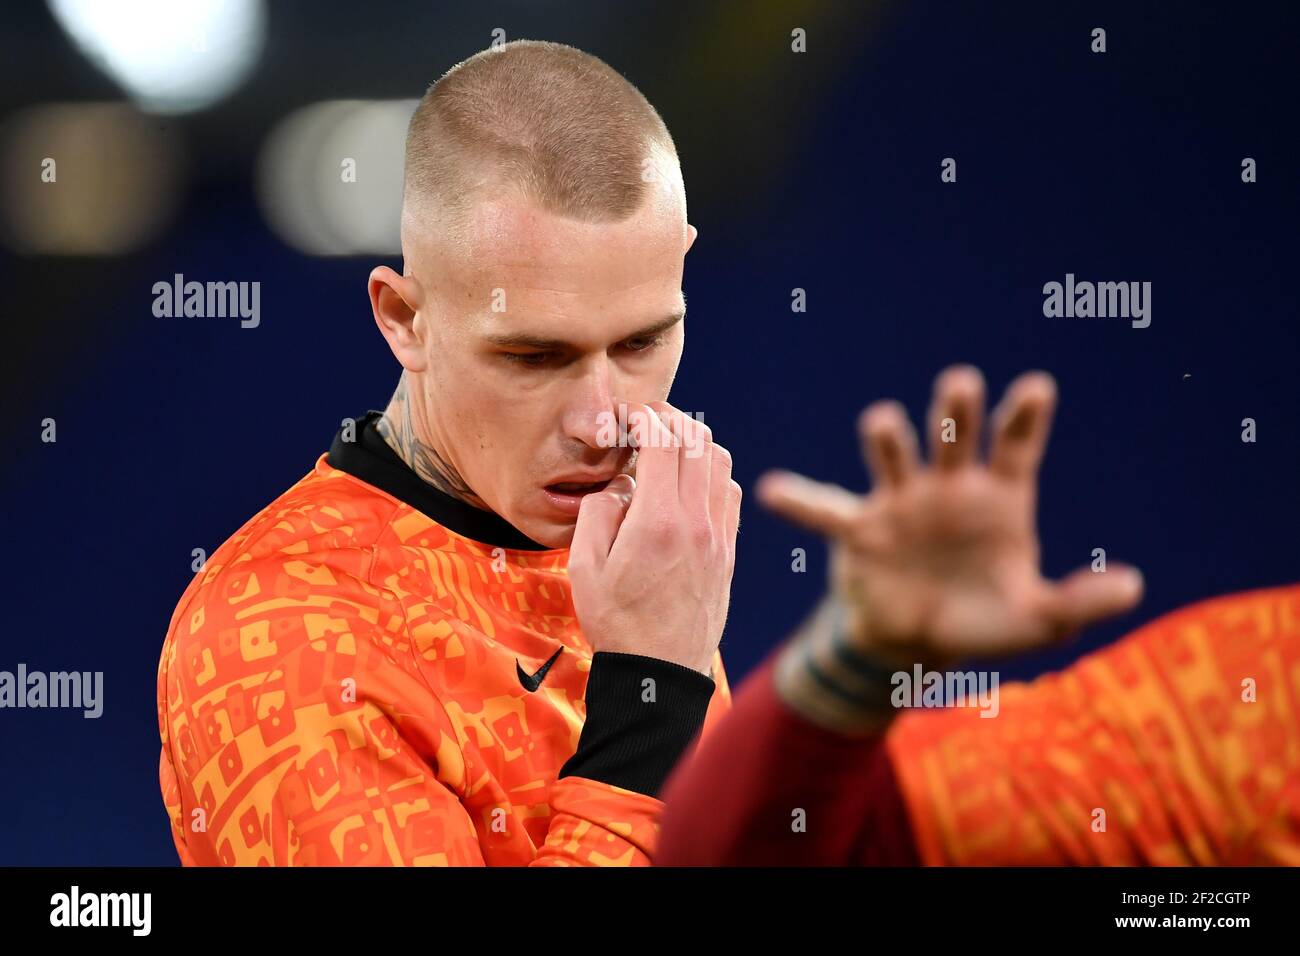 Rome, Italy. 11th Mar, 2021. Rick Karsdorp of AS Roma warms up during the Europa League round of 16 football match between AS Roma and FC Shakhtar Donetsk at Stadio Olimpico in Rome (Italy), March, 11th, 2021. Photo Antonietta Baldassarre/Insidefoto Credit: insidefoto srl/Alamy Live News Stock Photo